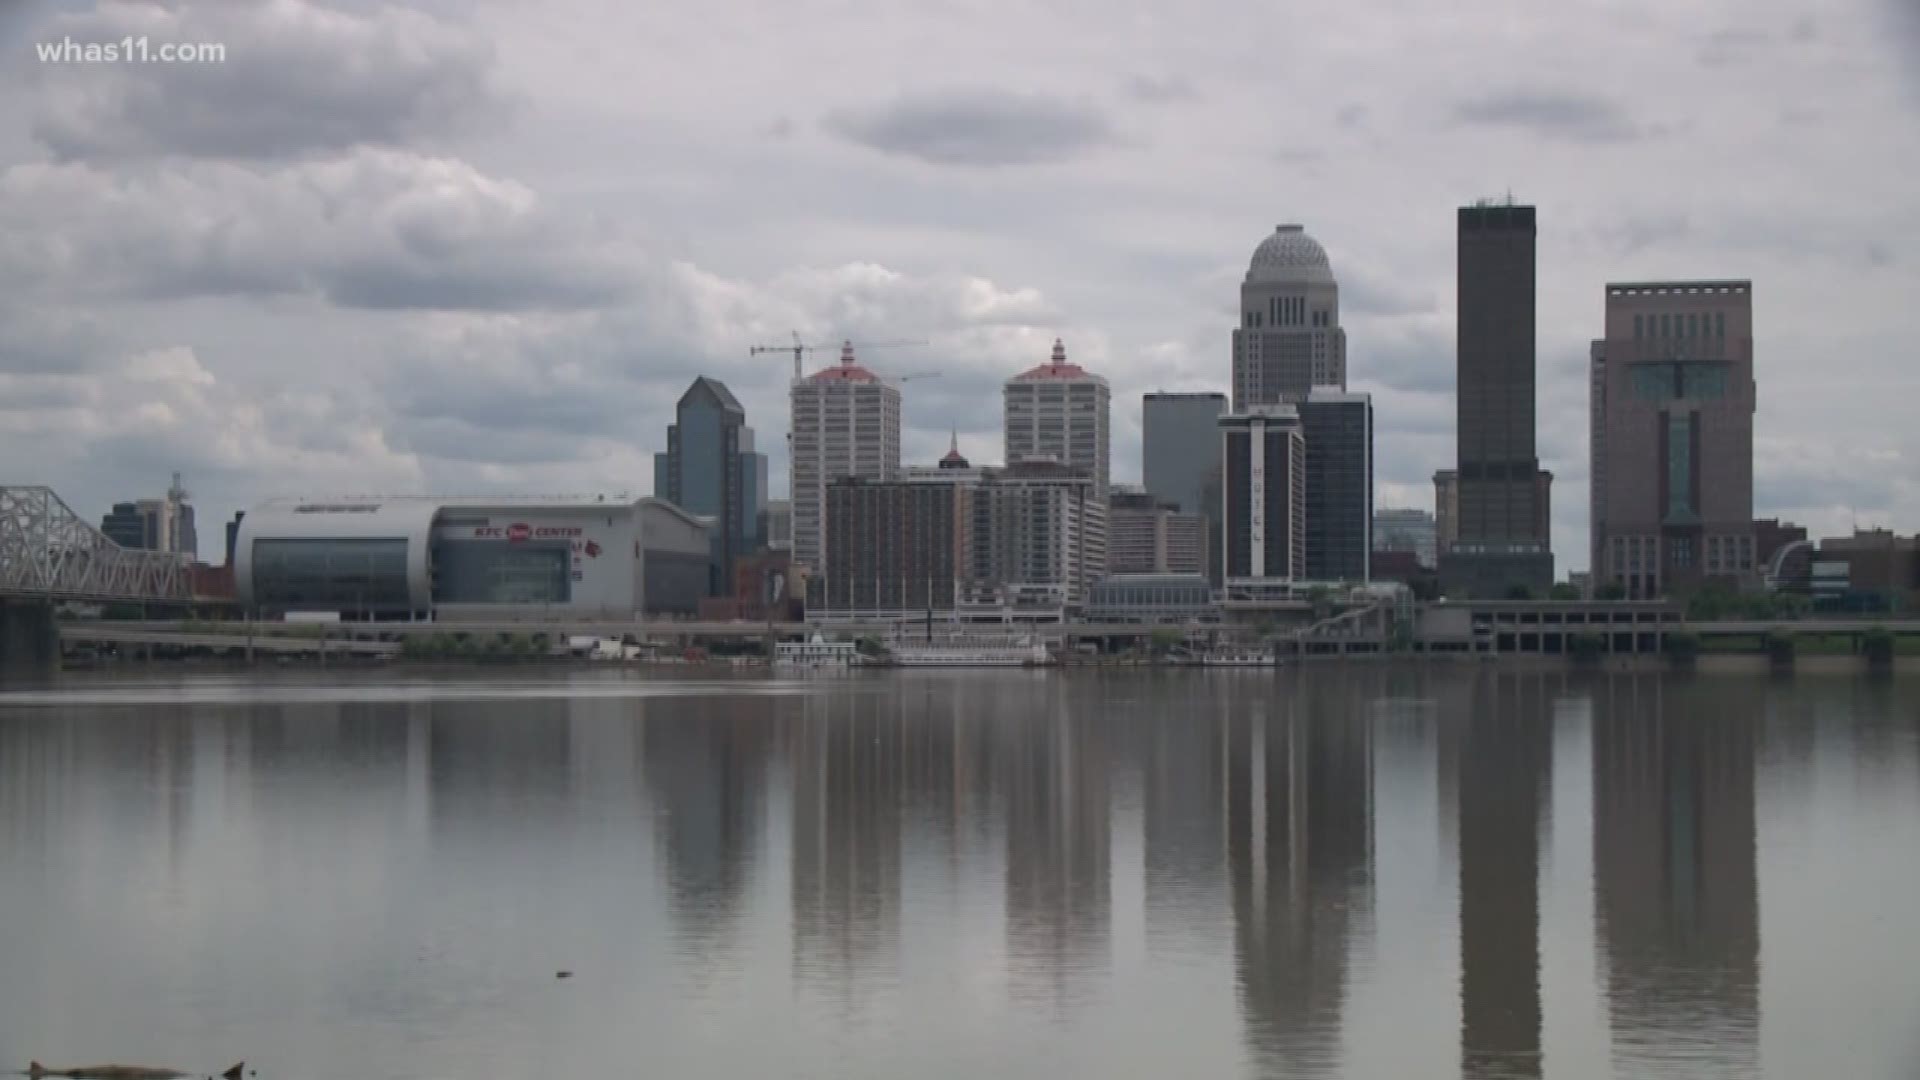 As we approach a new decade Mayor Greg Fischer, along with the Louisville Downtown Partnership looked back at the downtown core